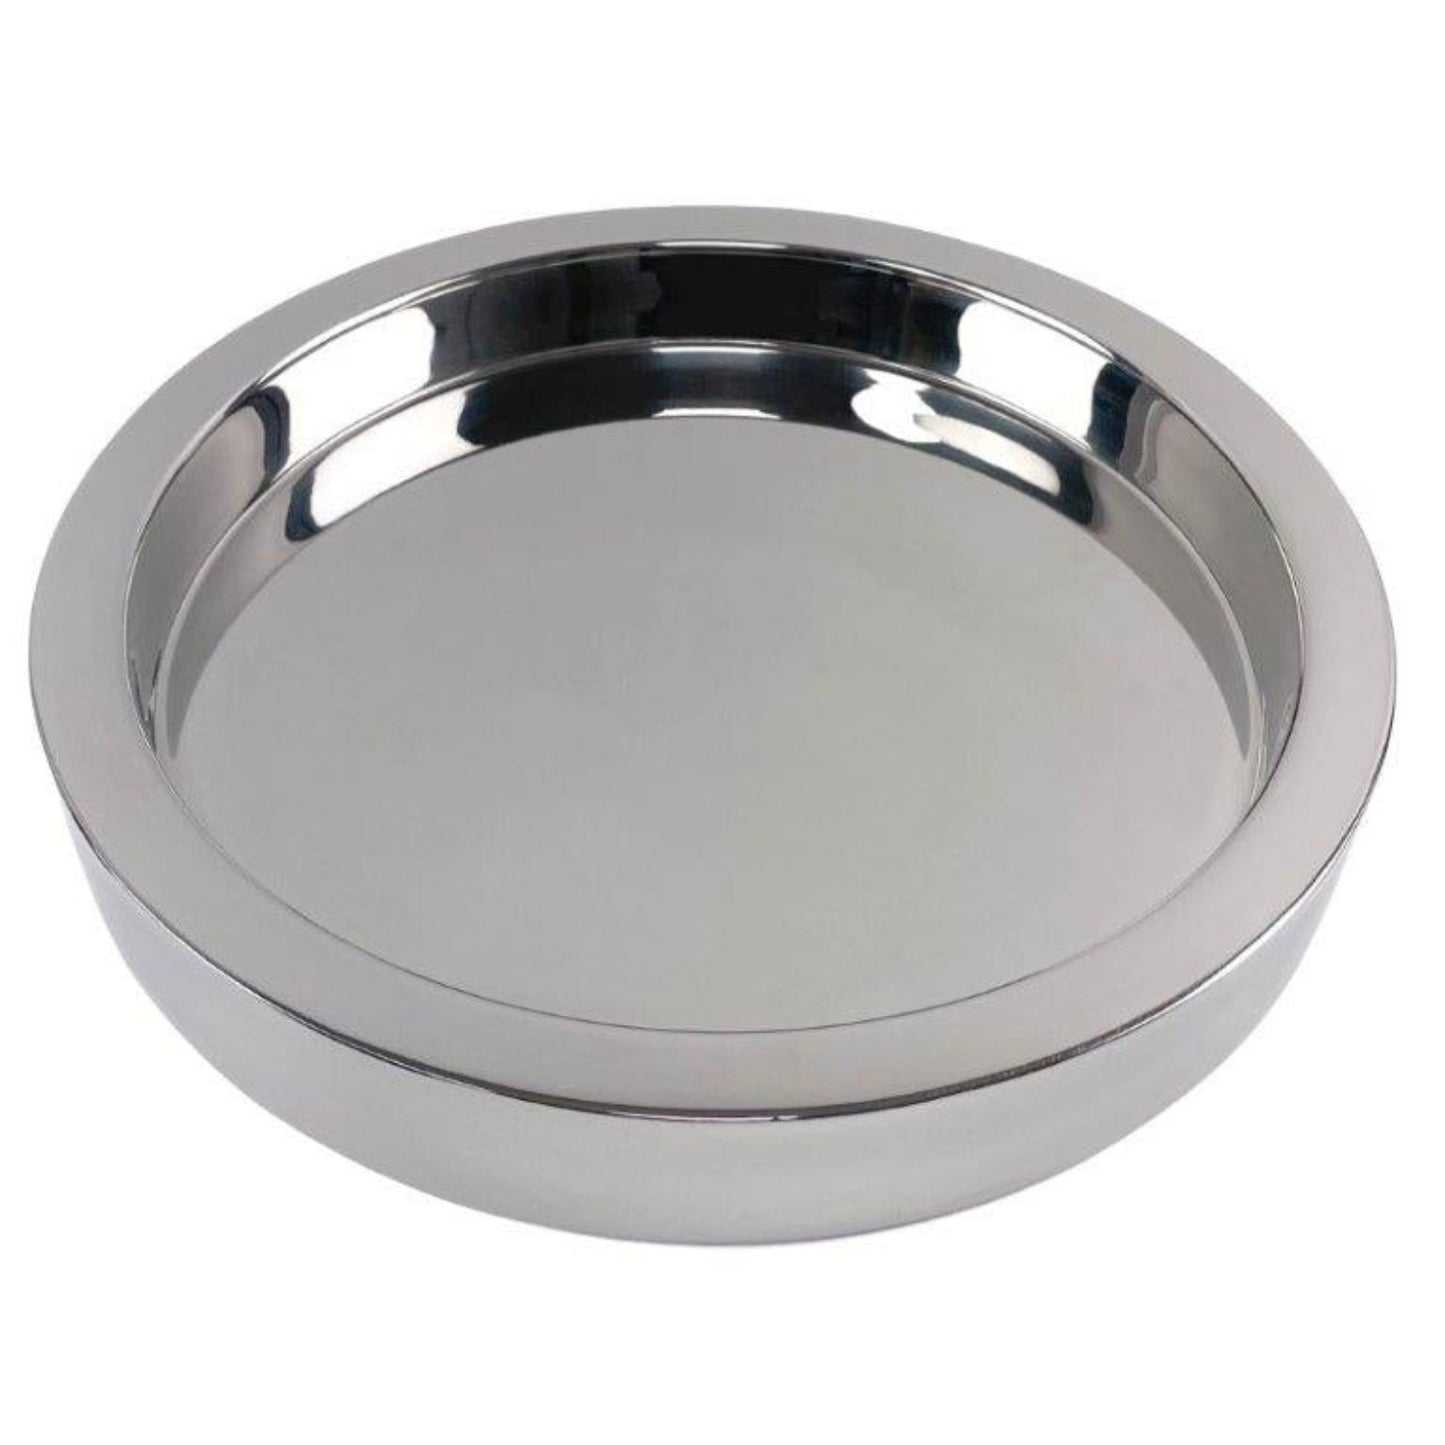 14" highly polished double walled tray